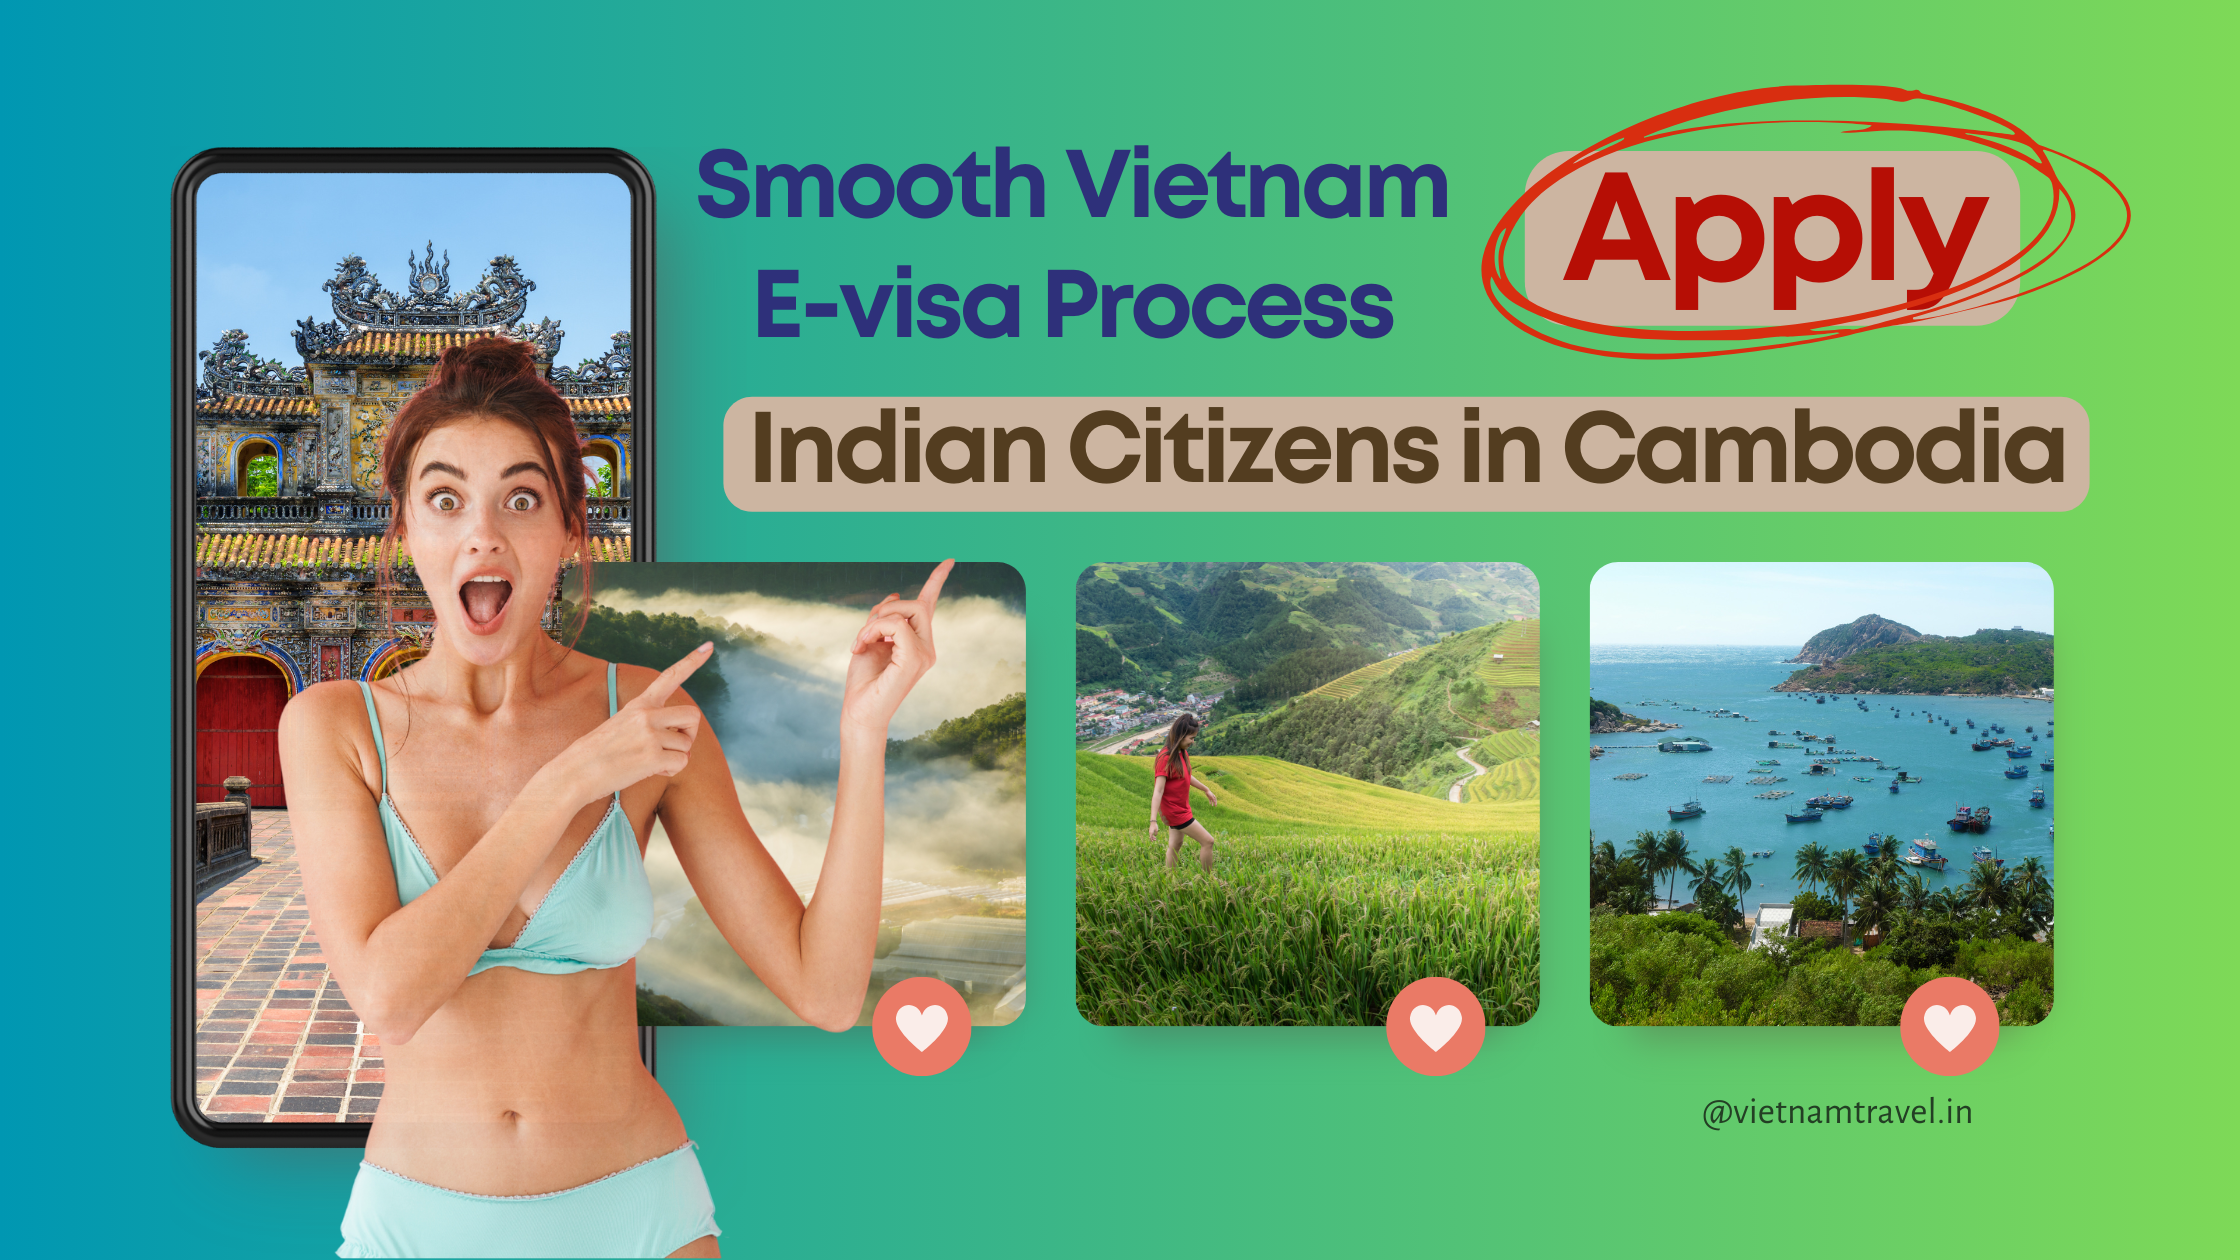 A-Comprehensive-Guide-to-a-Smooth-Vietnam-E-visa-Process-for-Indian-Citizens-in-Cambodia